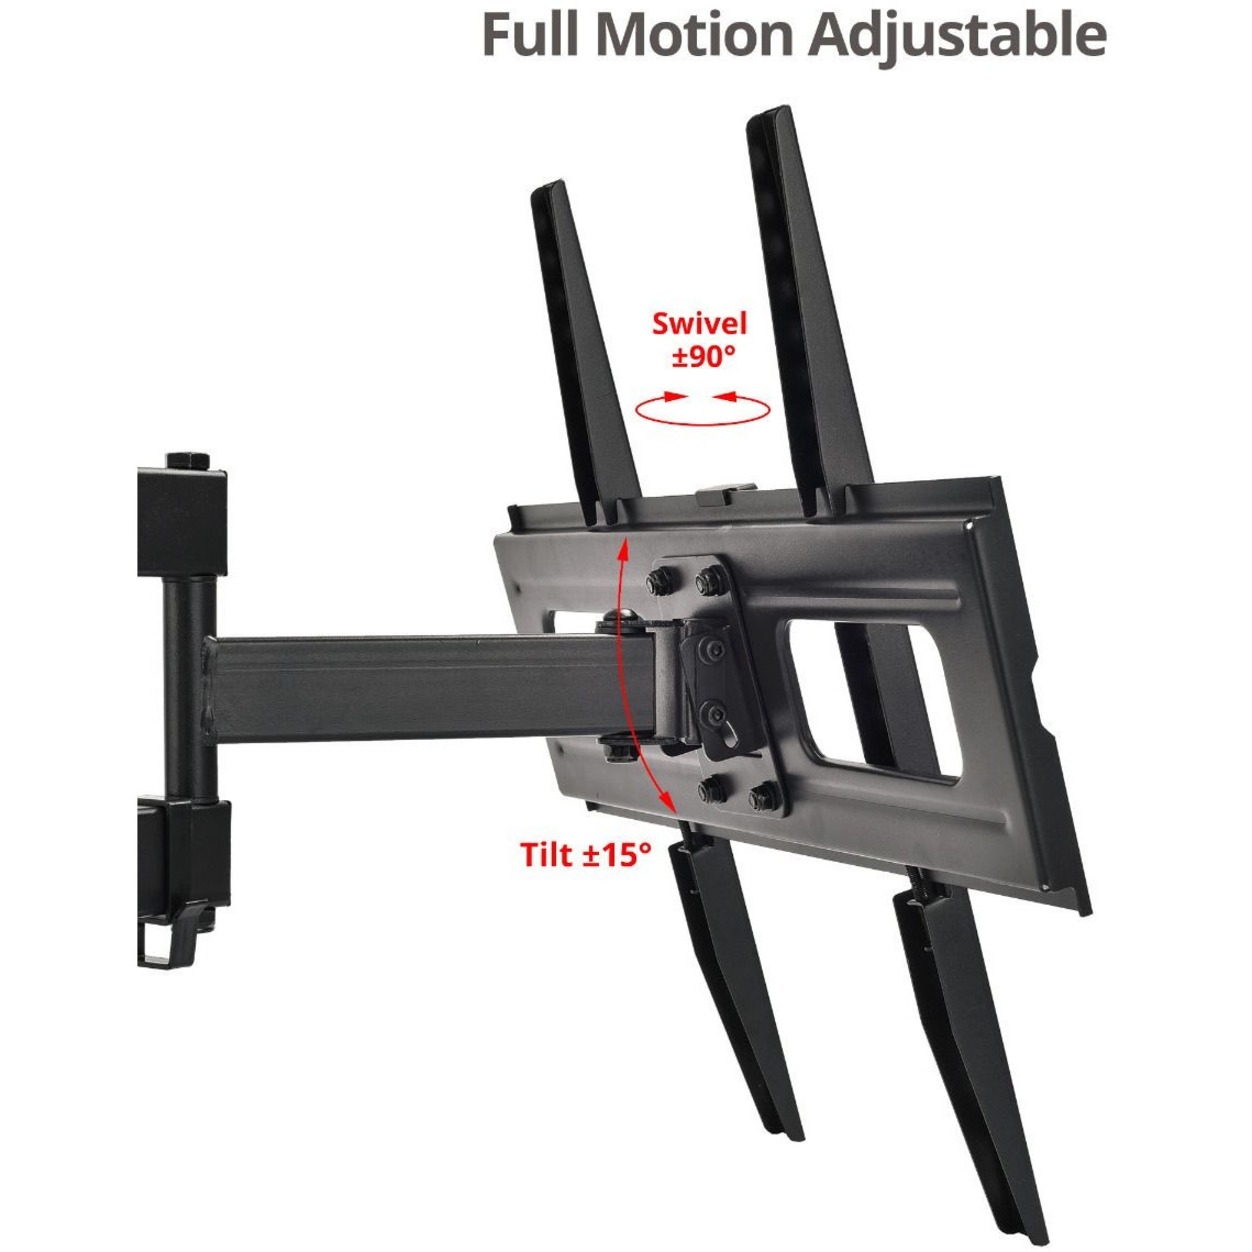 SIIG Full Motion TV Wall Mount 26" to 55", Black - image 2 of 7